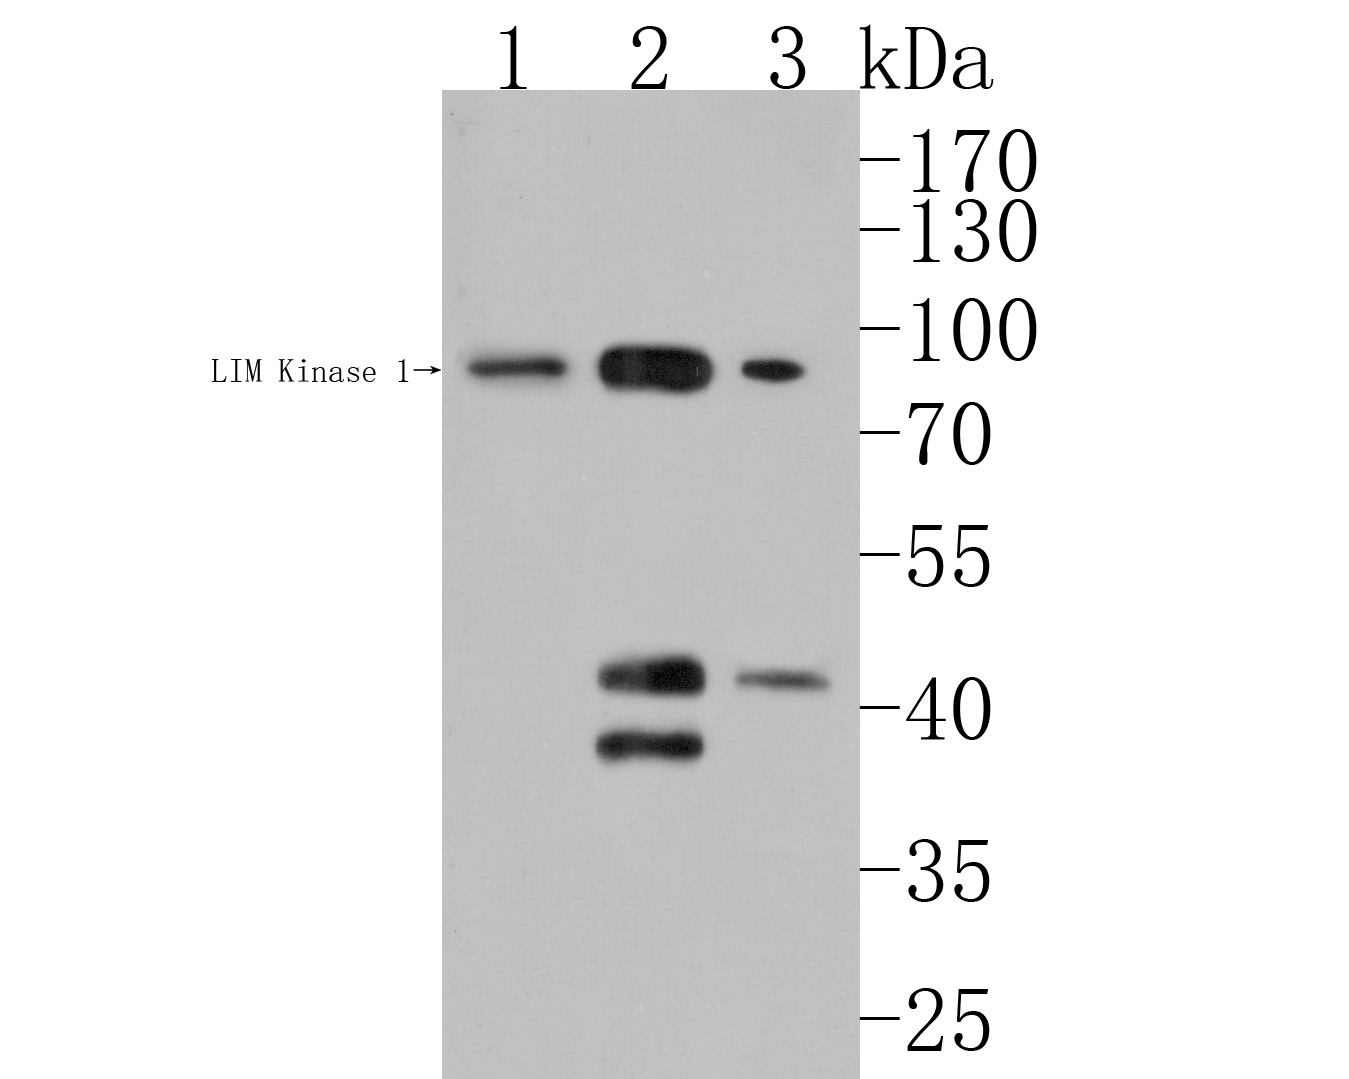 Western blot analysis of LIM Kinase 1 on different lysates. Proteins were transferred to a PVDF membrane and blocked with 5% BSA in PBS for 1 hour at room temperature. The primary antibody (HA500189, 1/1,000) was used in 5% BSA at room temperature for 2 hours. Goat Anti-Rabbit IgG - HRP Secondary Antibody (HA1001) at 1:200,000 dilution was used for 1 hour at room temperature.<br />
Positive control: <br />
Lane 1: Rat brain tissue lysate<br />
Lane 2: Rat heart tissue lysate<br />
Lane 3: Rat skeletal muscle tissue lysate